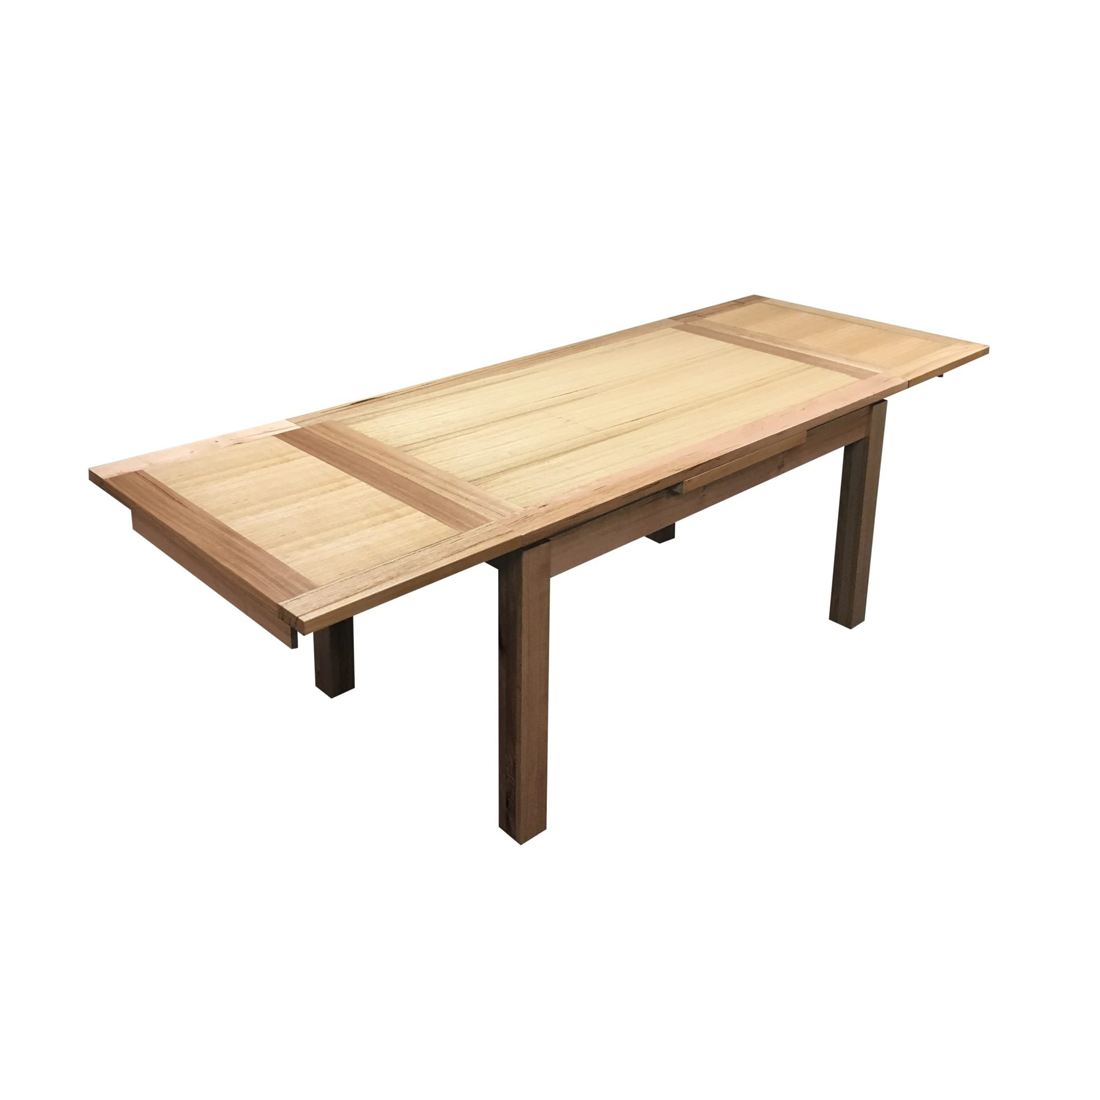 Topaz Ends Extension Table